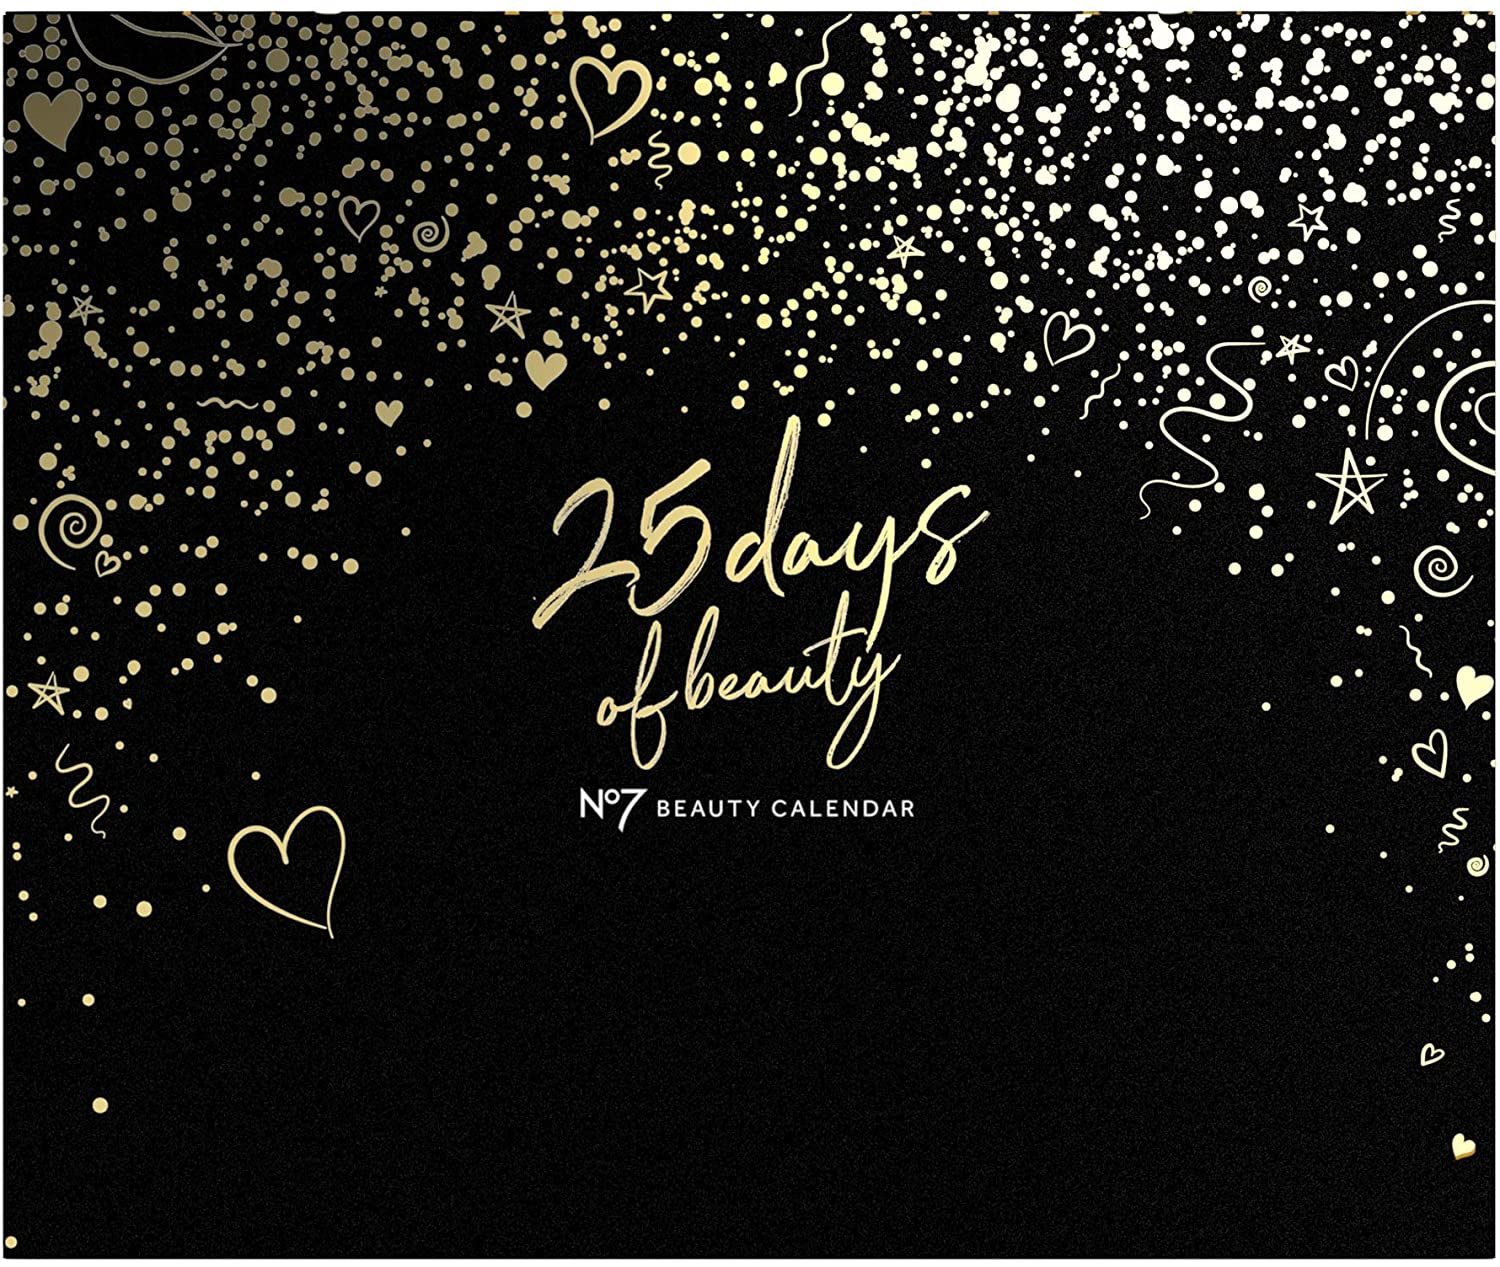 No7 releases Beauty Advent Calendar worth £465 with an epic twist